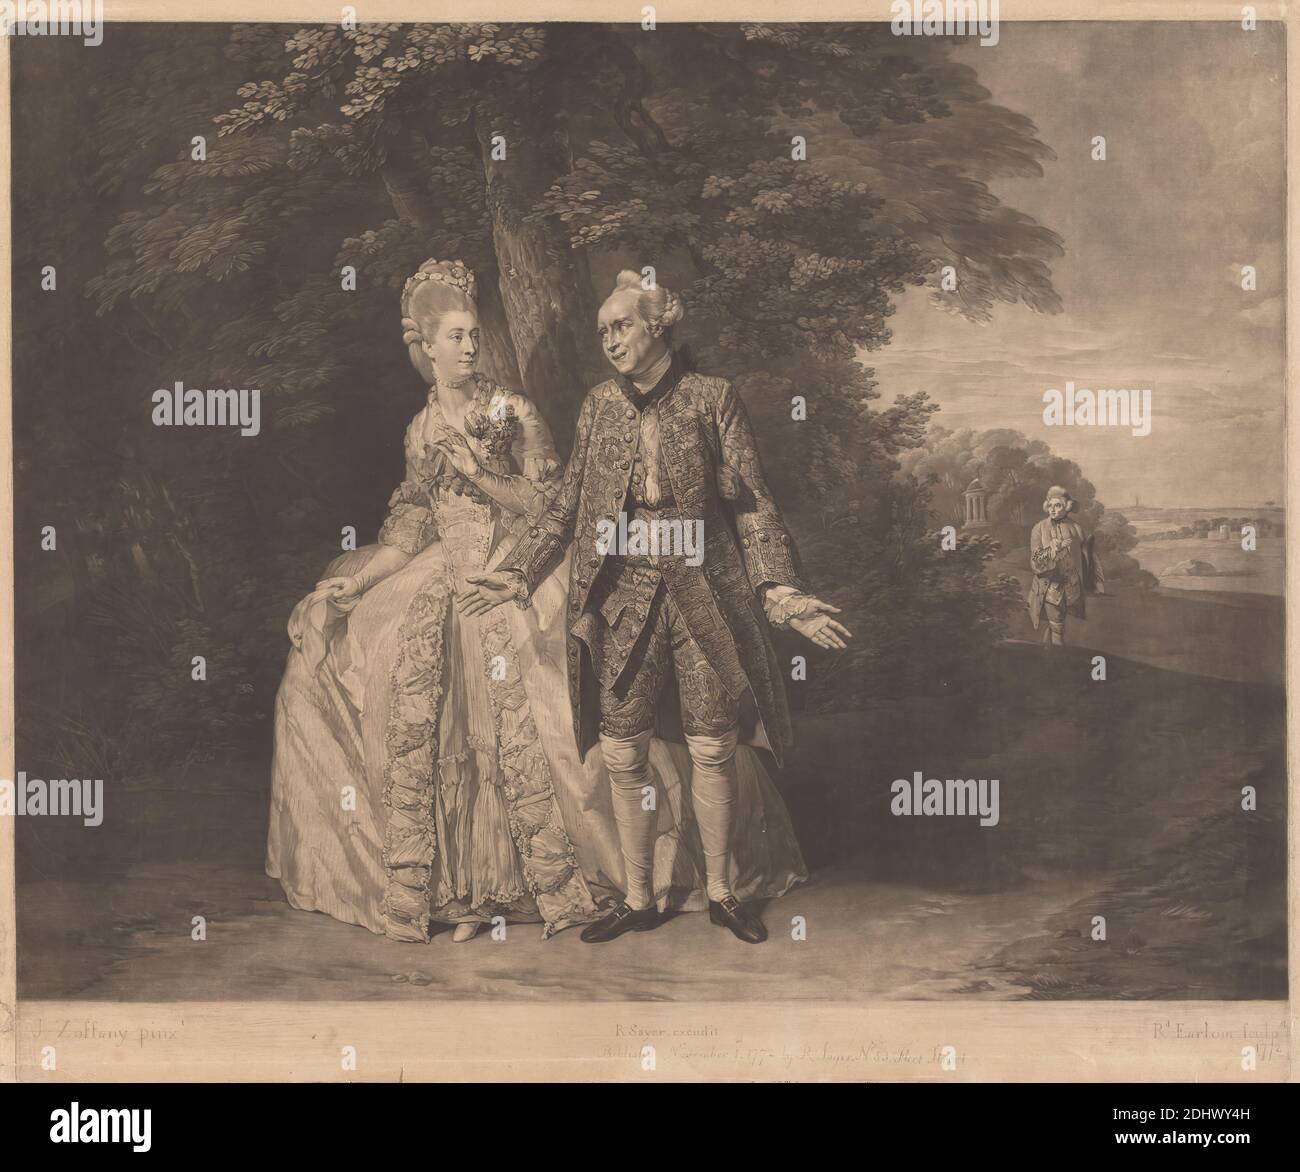 Thomas King and Mrs. Baddeley, Richard Earlom, 1743–1822, British, after Johan Joseph Zoffany RA, 1733–1810, German, active in Britain (from 1760), Published by Robert Sayer, 1725–1794, British, 1772, Mezzotint on medium, slightly textured, cream laid paper, Sheet: 18 3/4 x 22 5/8 inches (47.6 x 57.5 cm), Plate: 18 1/4 x 21 7/8 inches (46.4 x 55.6 cm), and Image: 16 7/8 x 21 7/8 inches (42.9 x 55.6 cm), actors, coat, corsage, dress, hat, kerchief, park (grounds), portrait, tree Stock Photo